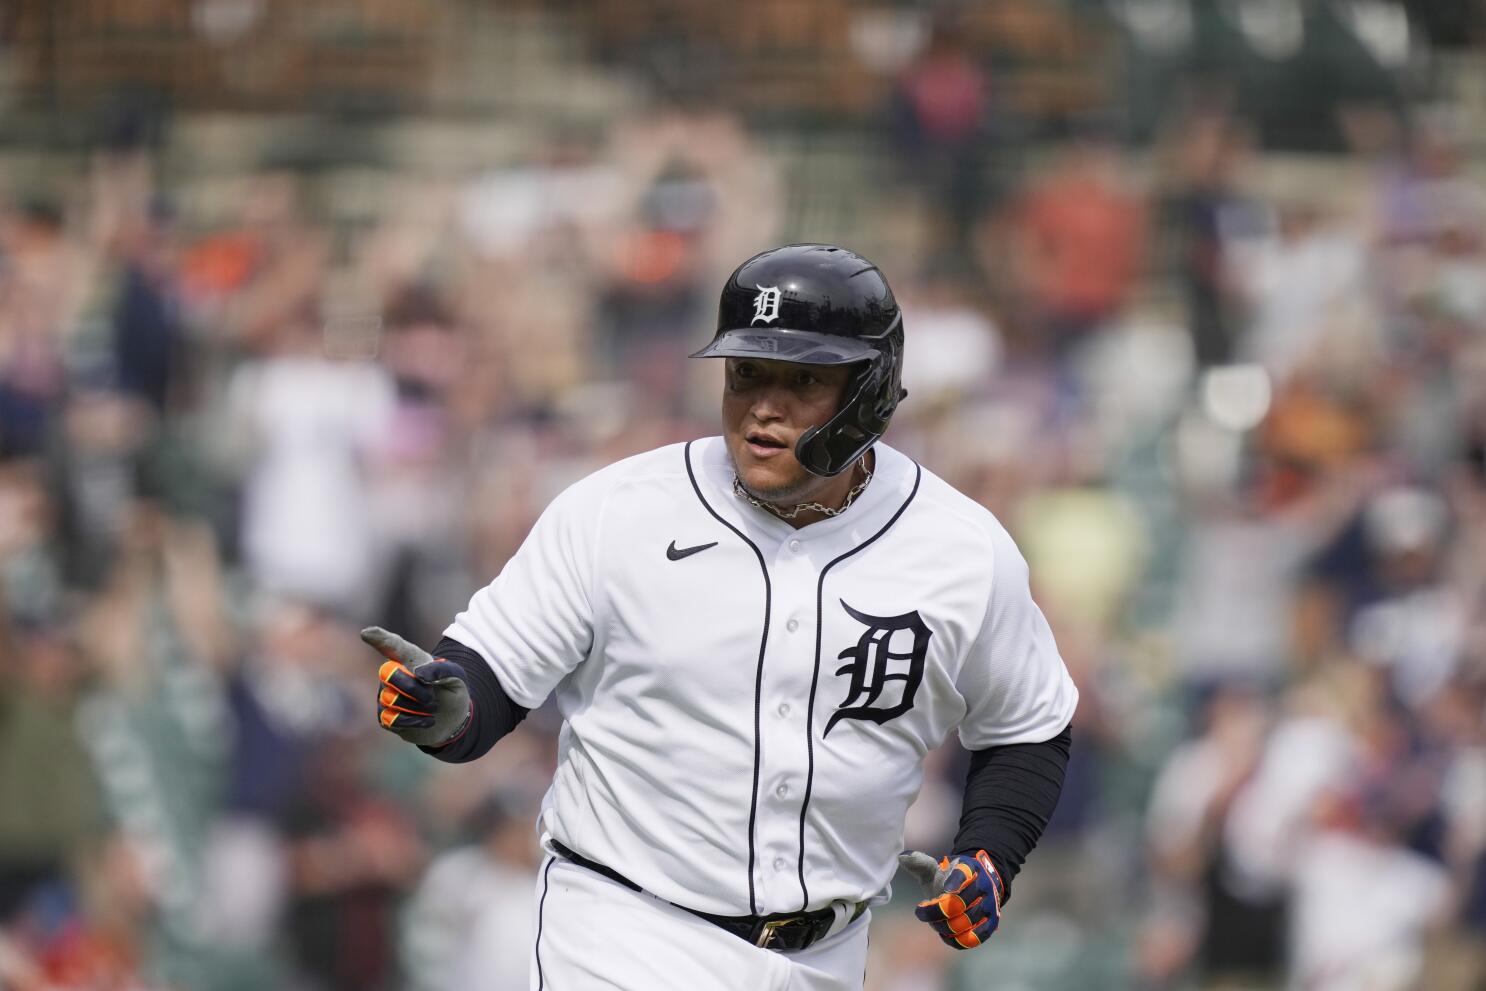 Tigers' Miguel Cabrera says he thinks next season will be his last